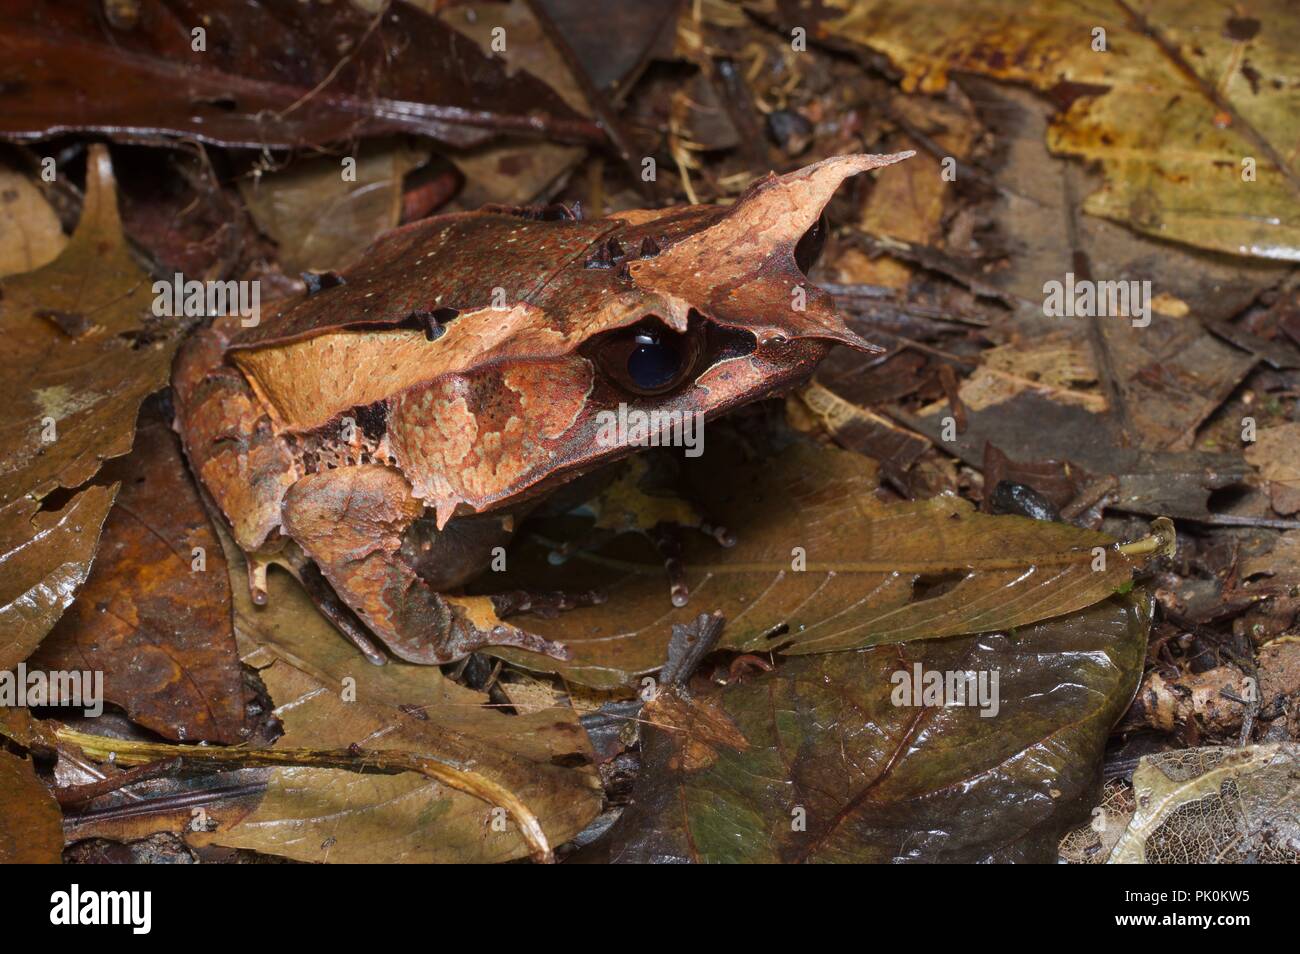 A Malayan Horned Frog (Megophrys nasuta) on the forest floor at night in Gunung Mulu National Park, Sarawak, East Malaysia, Borneo Stock Photo